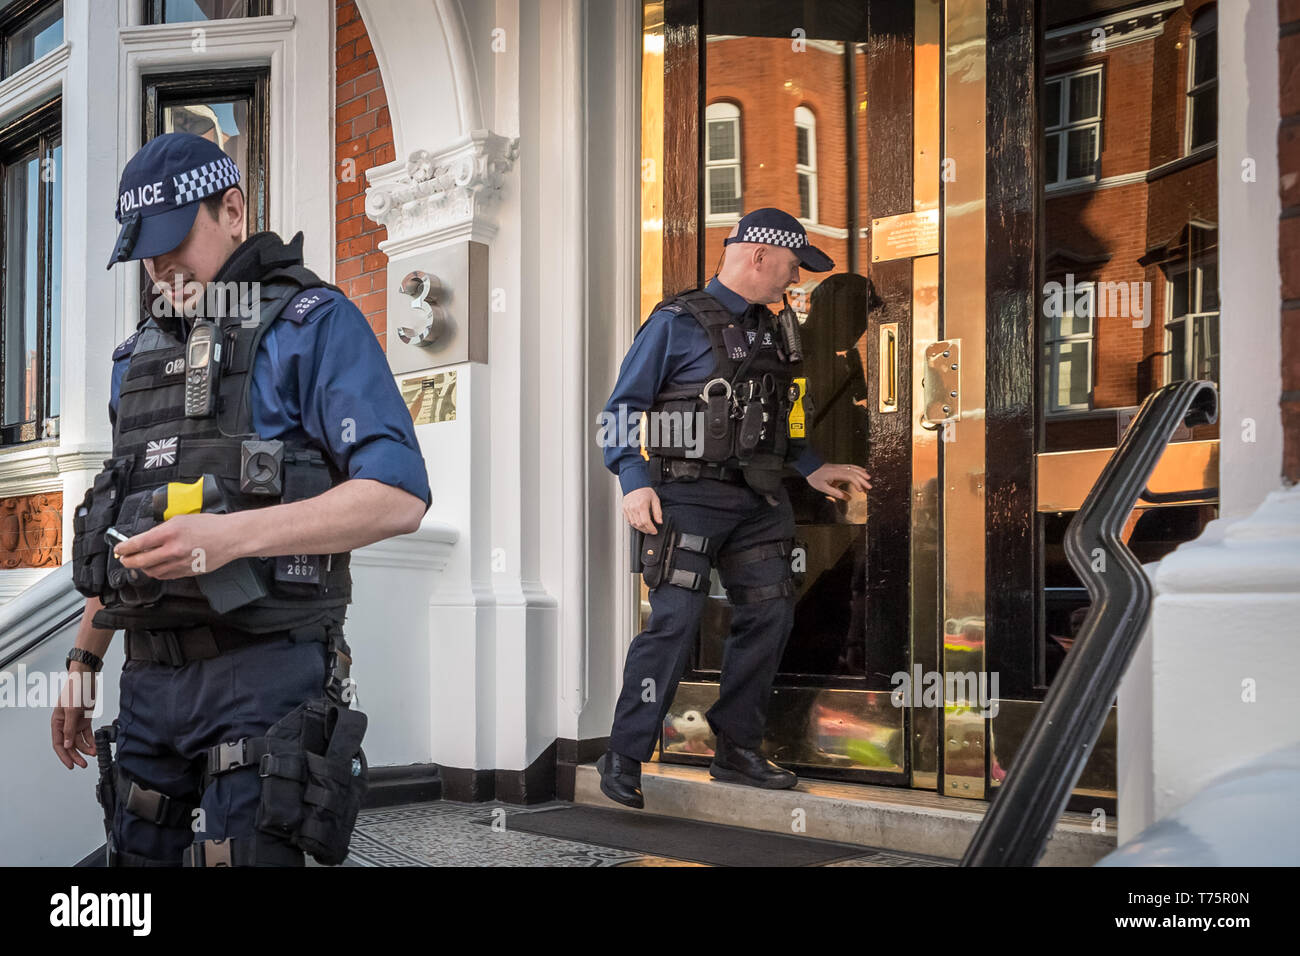 Met police are seen leaving the Ecuadorian Embassy in Knightsbridge on the day of Julian Assange's forced eviction and arrest. London, UK. Stock Photo